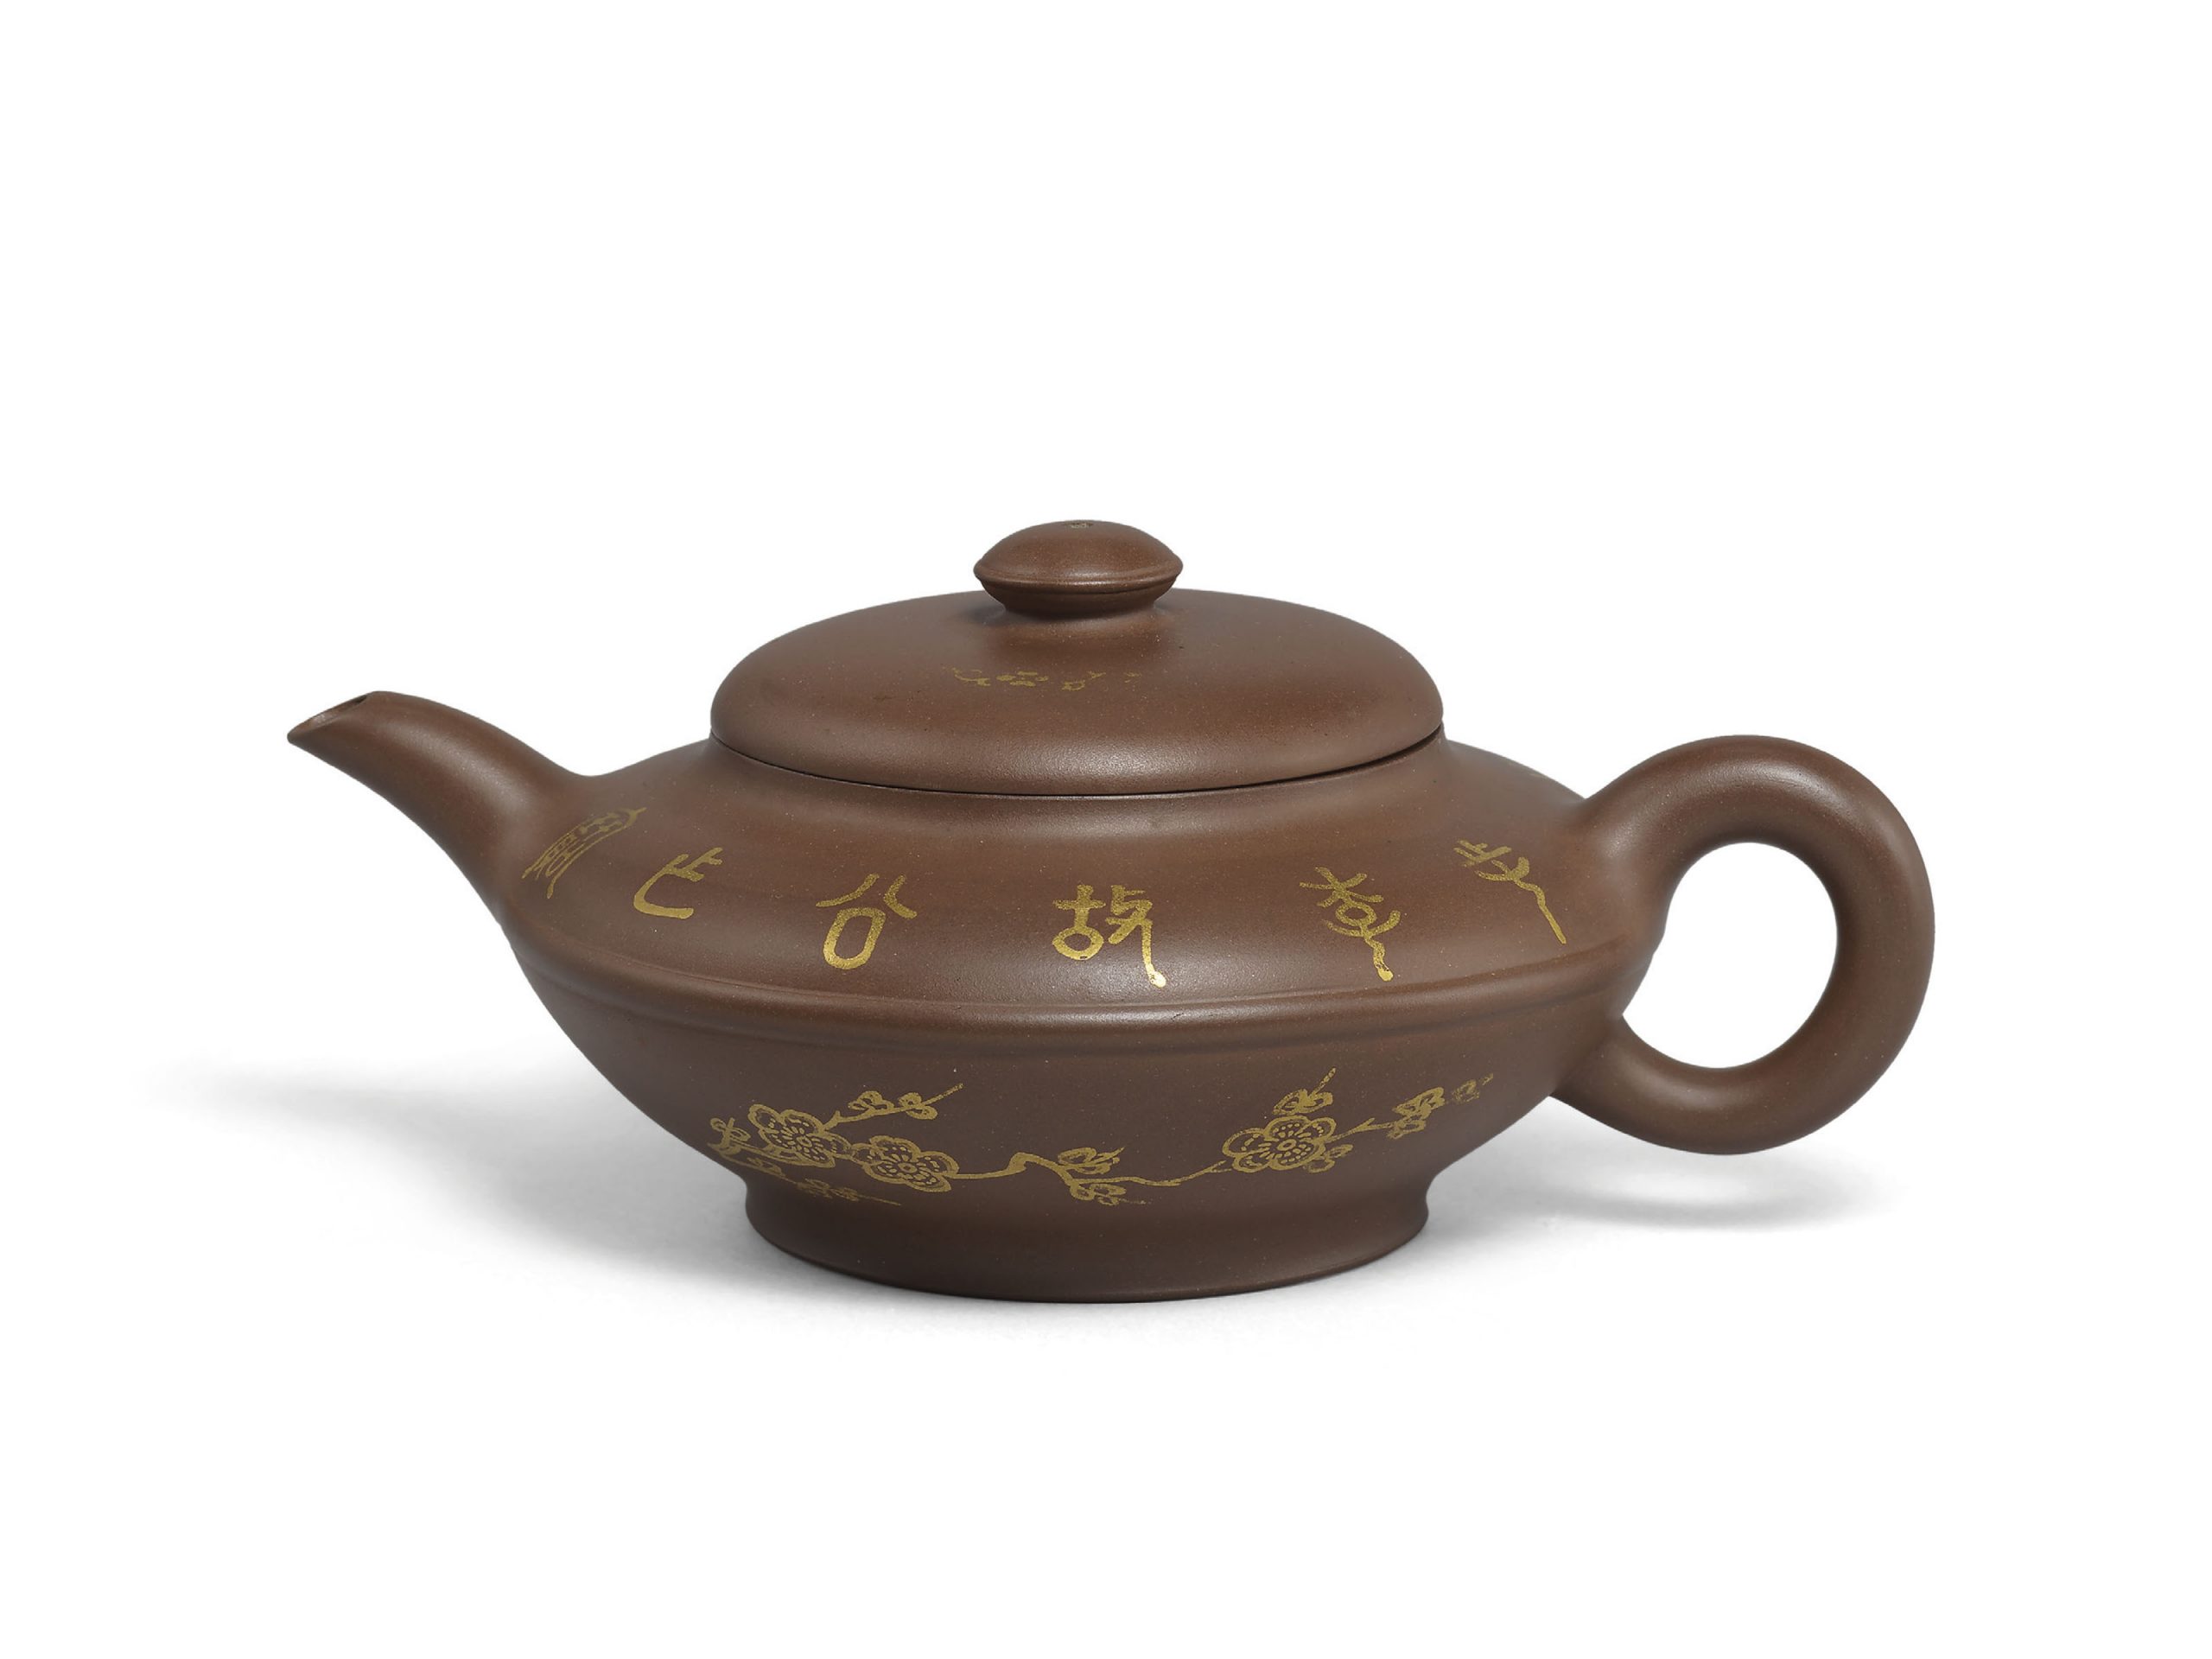 A YIXING GILT-DECORATED AND INSCRIBED TEAPOT